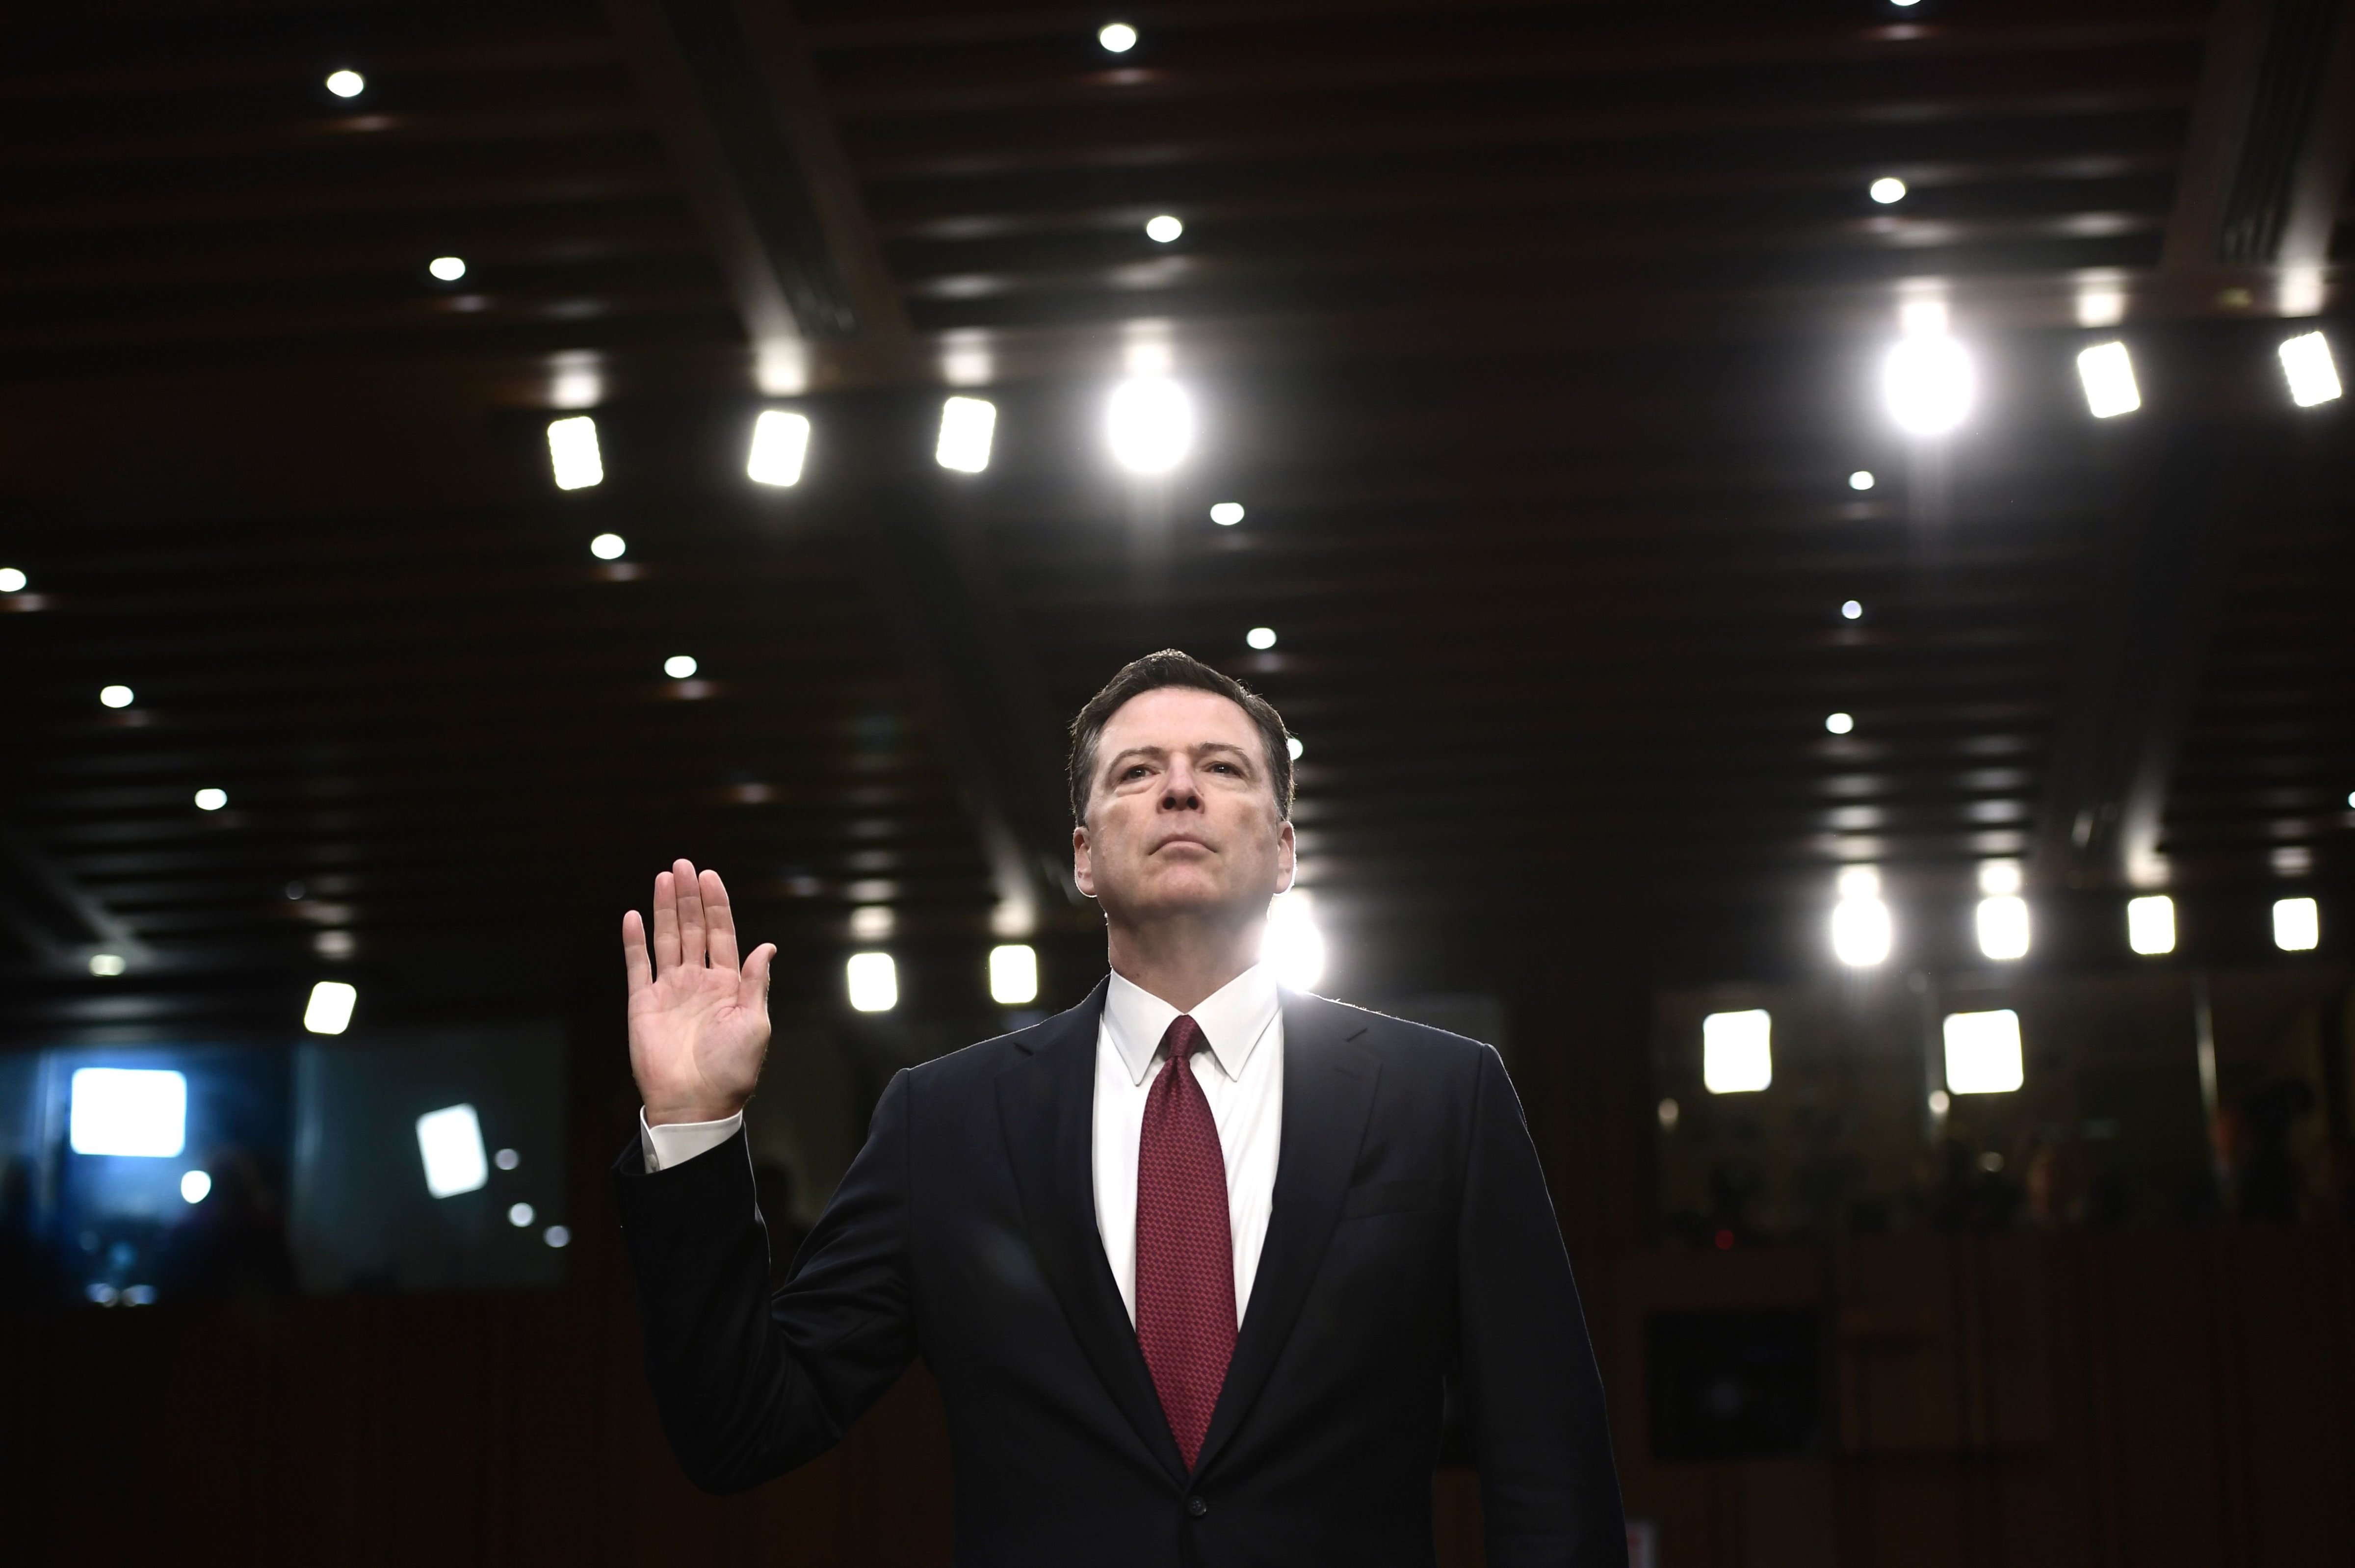 Former FBI Director James Comey takes the oath before he testifies during a US Senate Select Committee on Intelligence hearing on Capitol Hill in Washington, DC, June 8, 2017. (Brendan Smialowski—AFP/Getty Images)